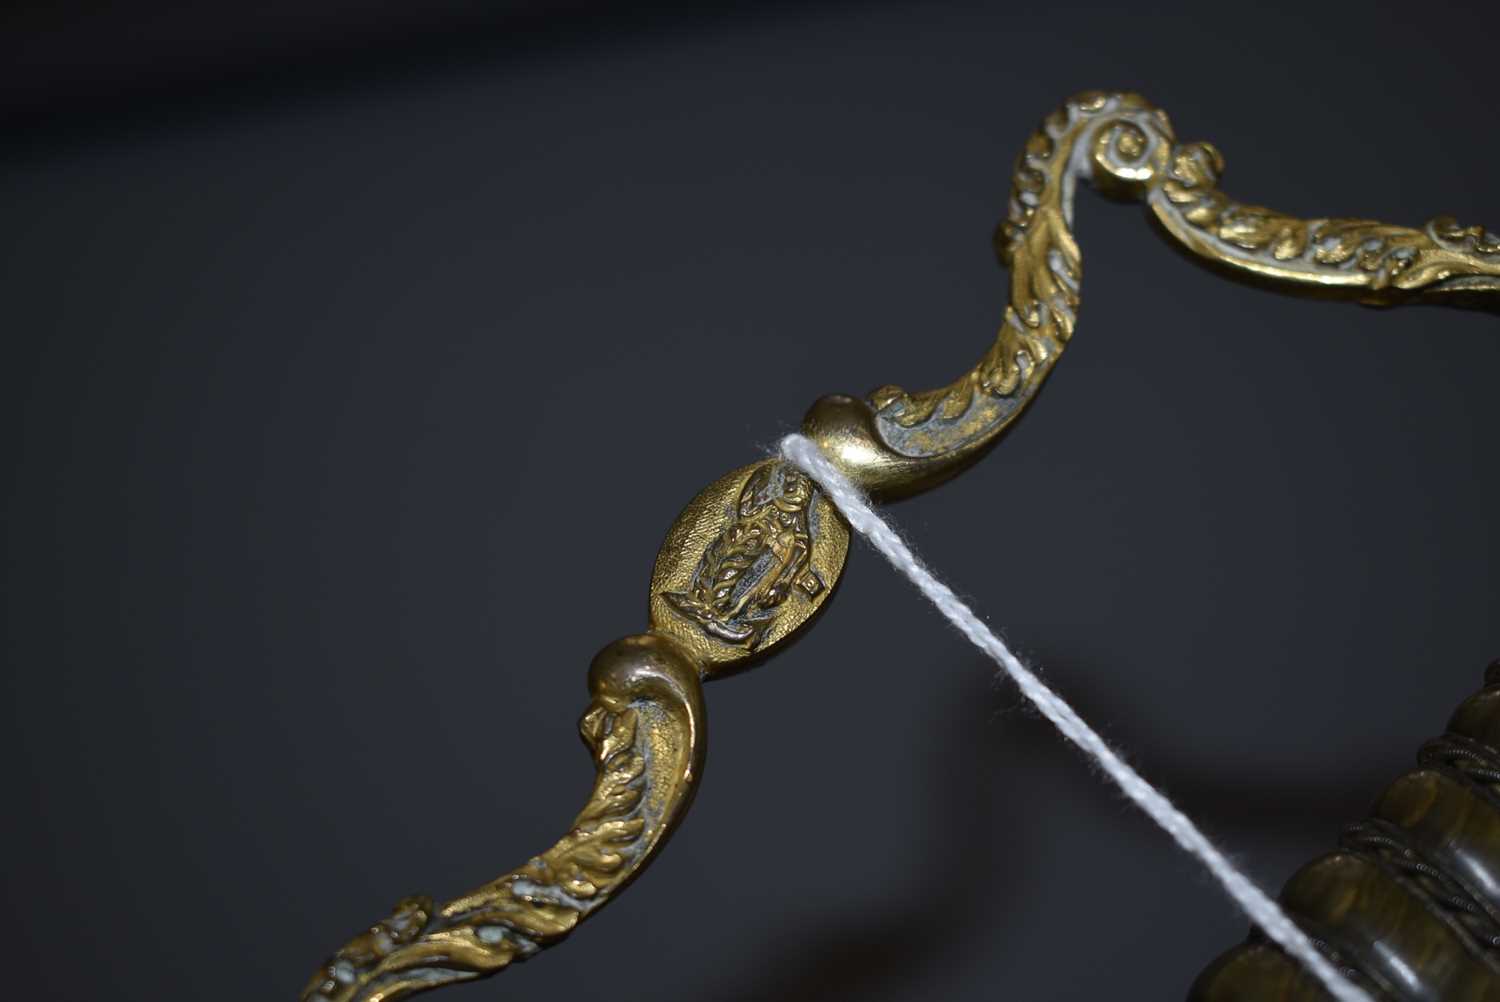 AN ORNATELY MOUNTED GEORGIAN NAVAL OFFICER'S SWORD, - Image 4 of 18